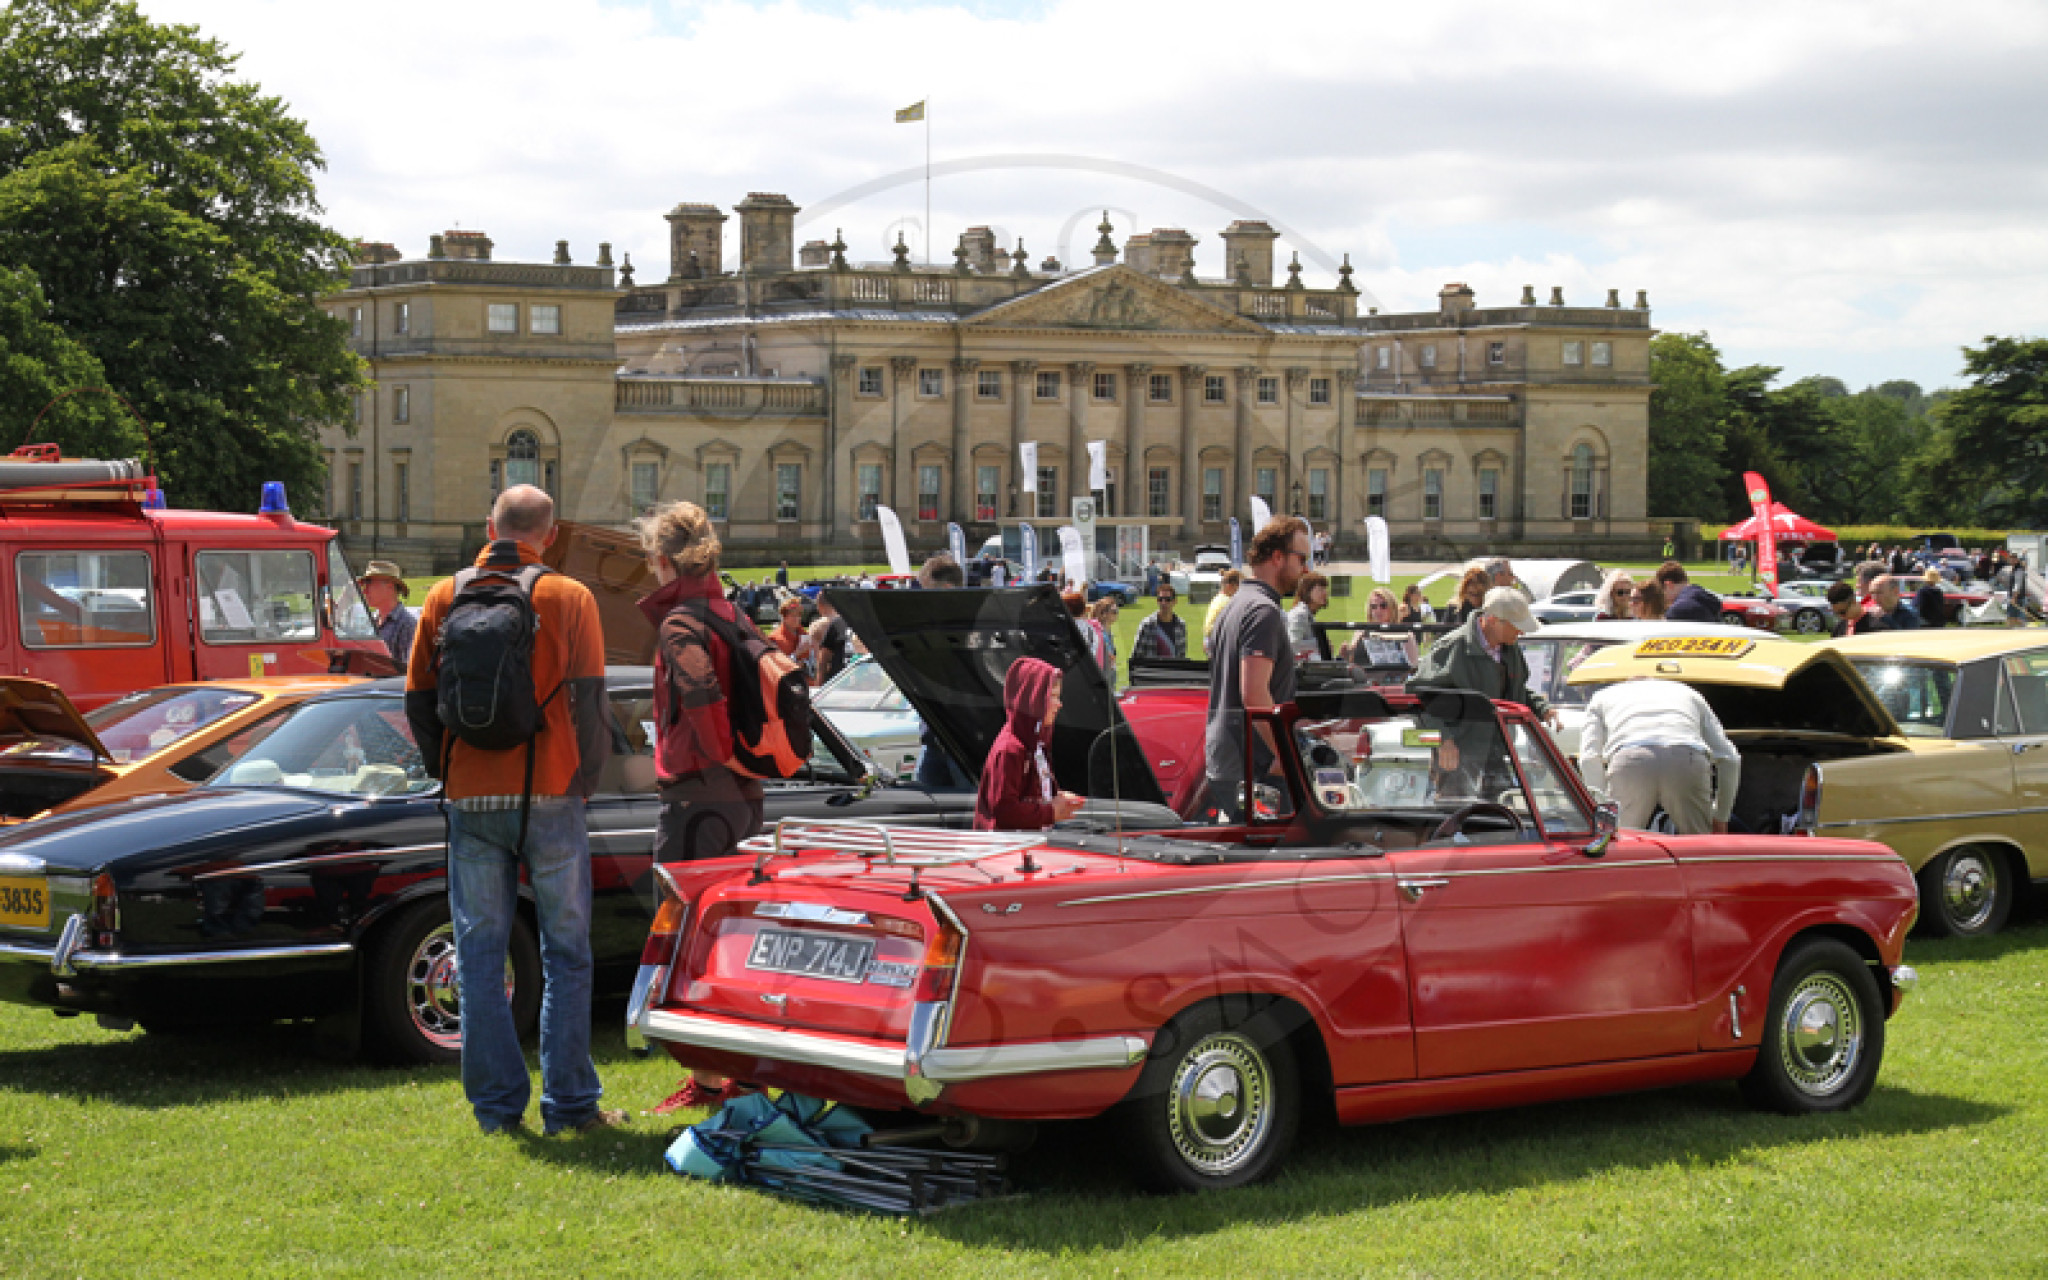 The-Motor-Show-at-Harewood-House-Gallery-2-July-2017-002T.jpg